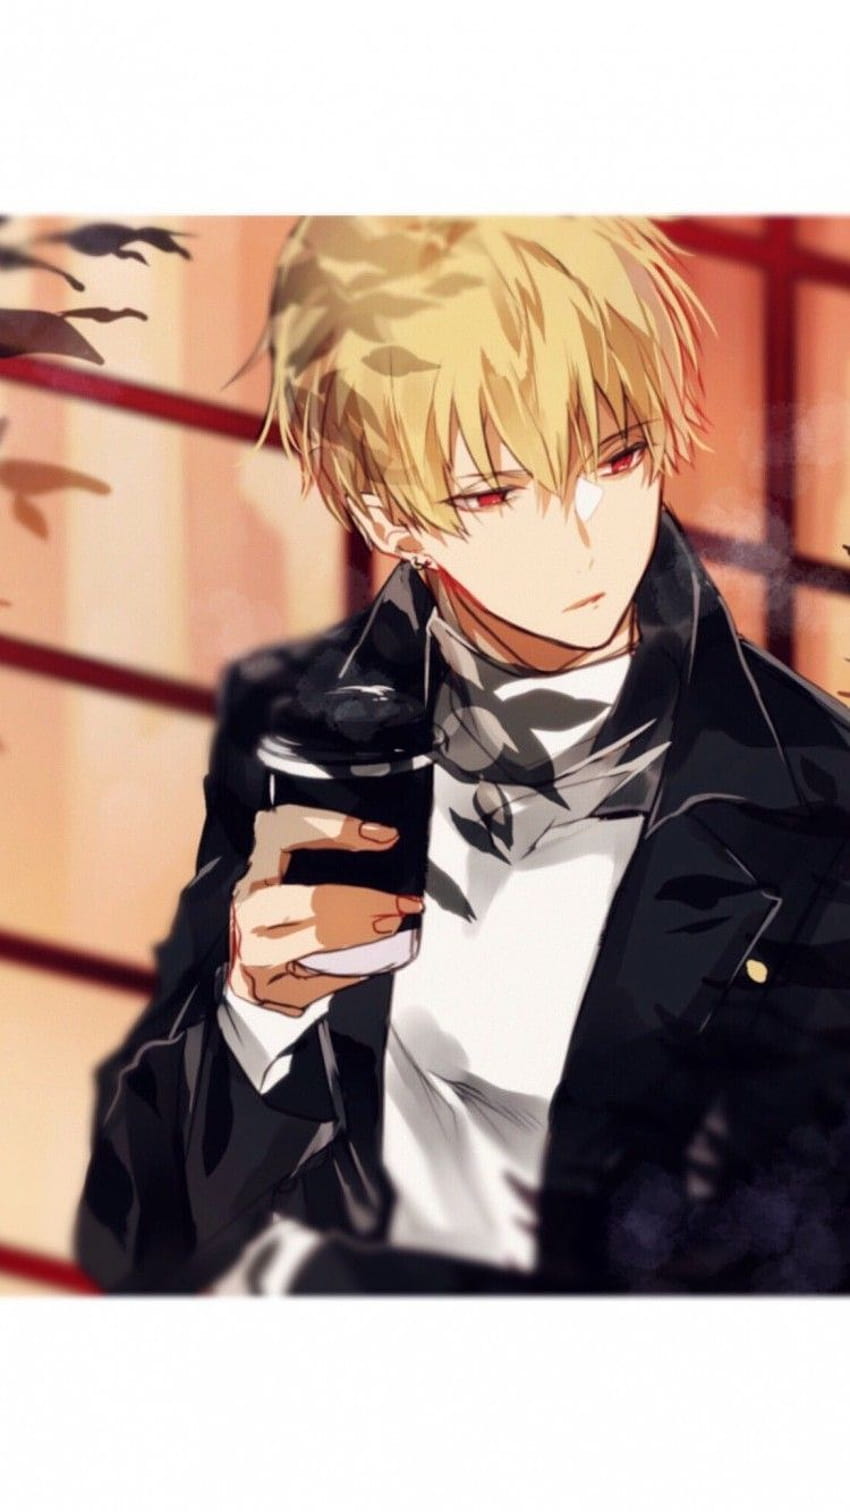 750x1334 ギルガメッシュ, Fate Stay Night, Anime Boy, Red Eyes, Blonde, Coffee for iPhone 7, iPhone 6, blonde anime boy HD電話の壁紙